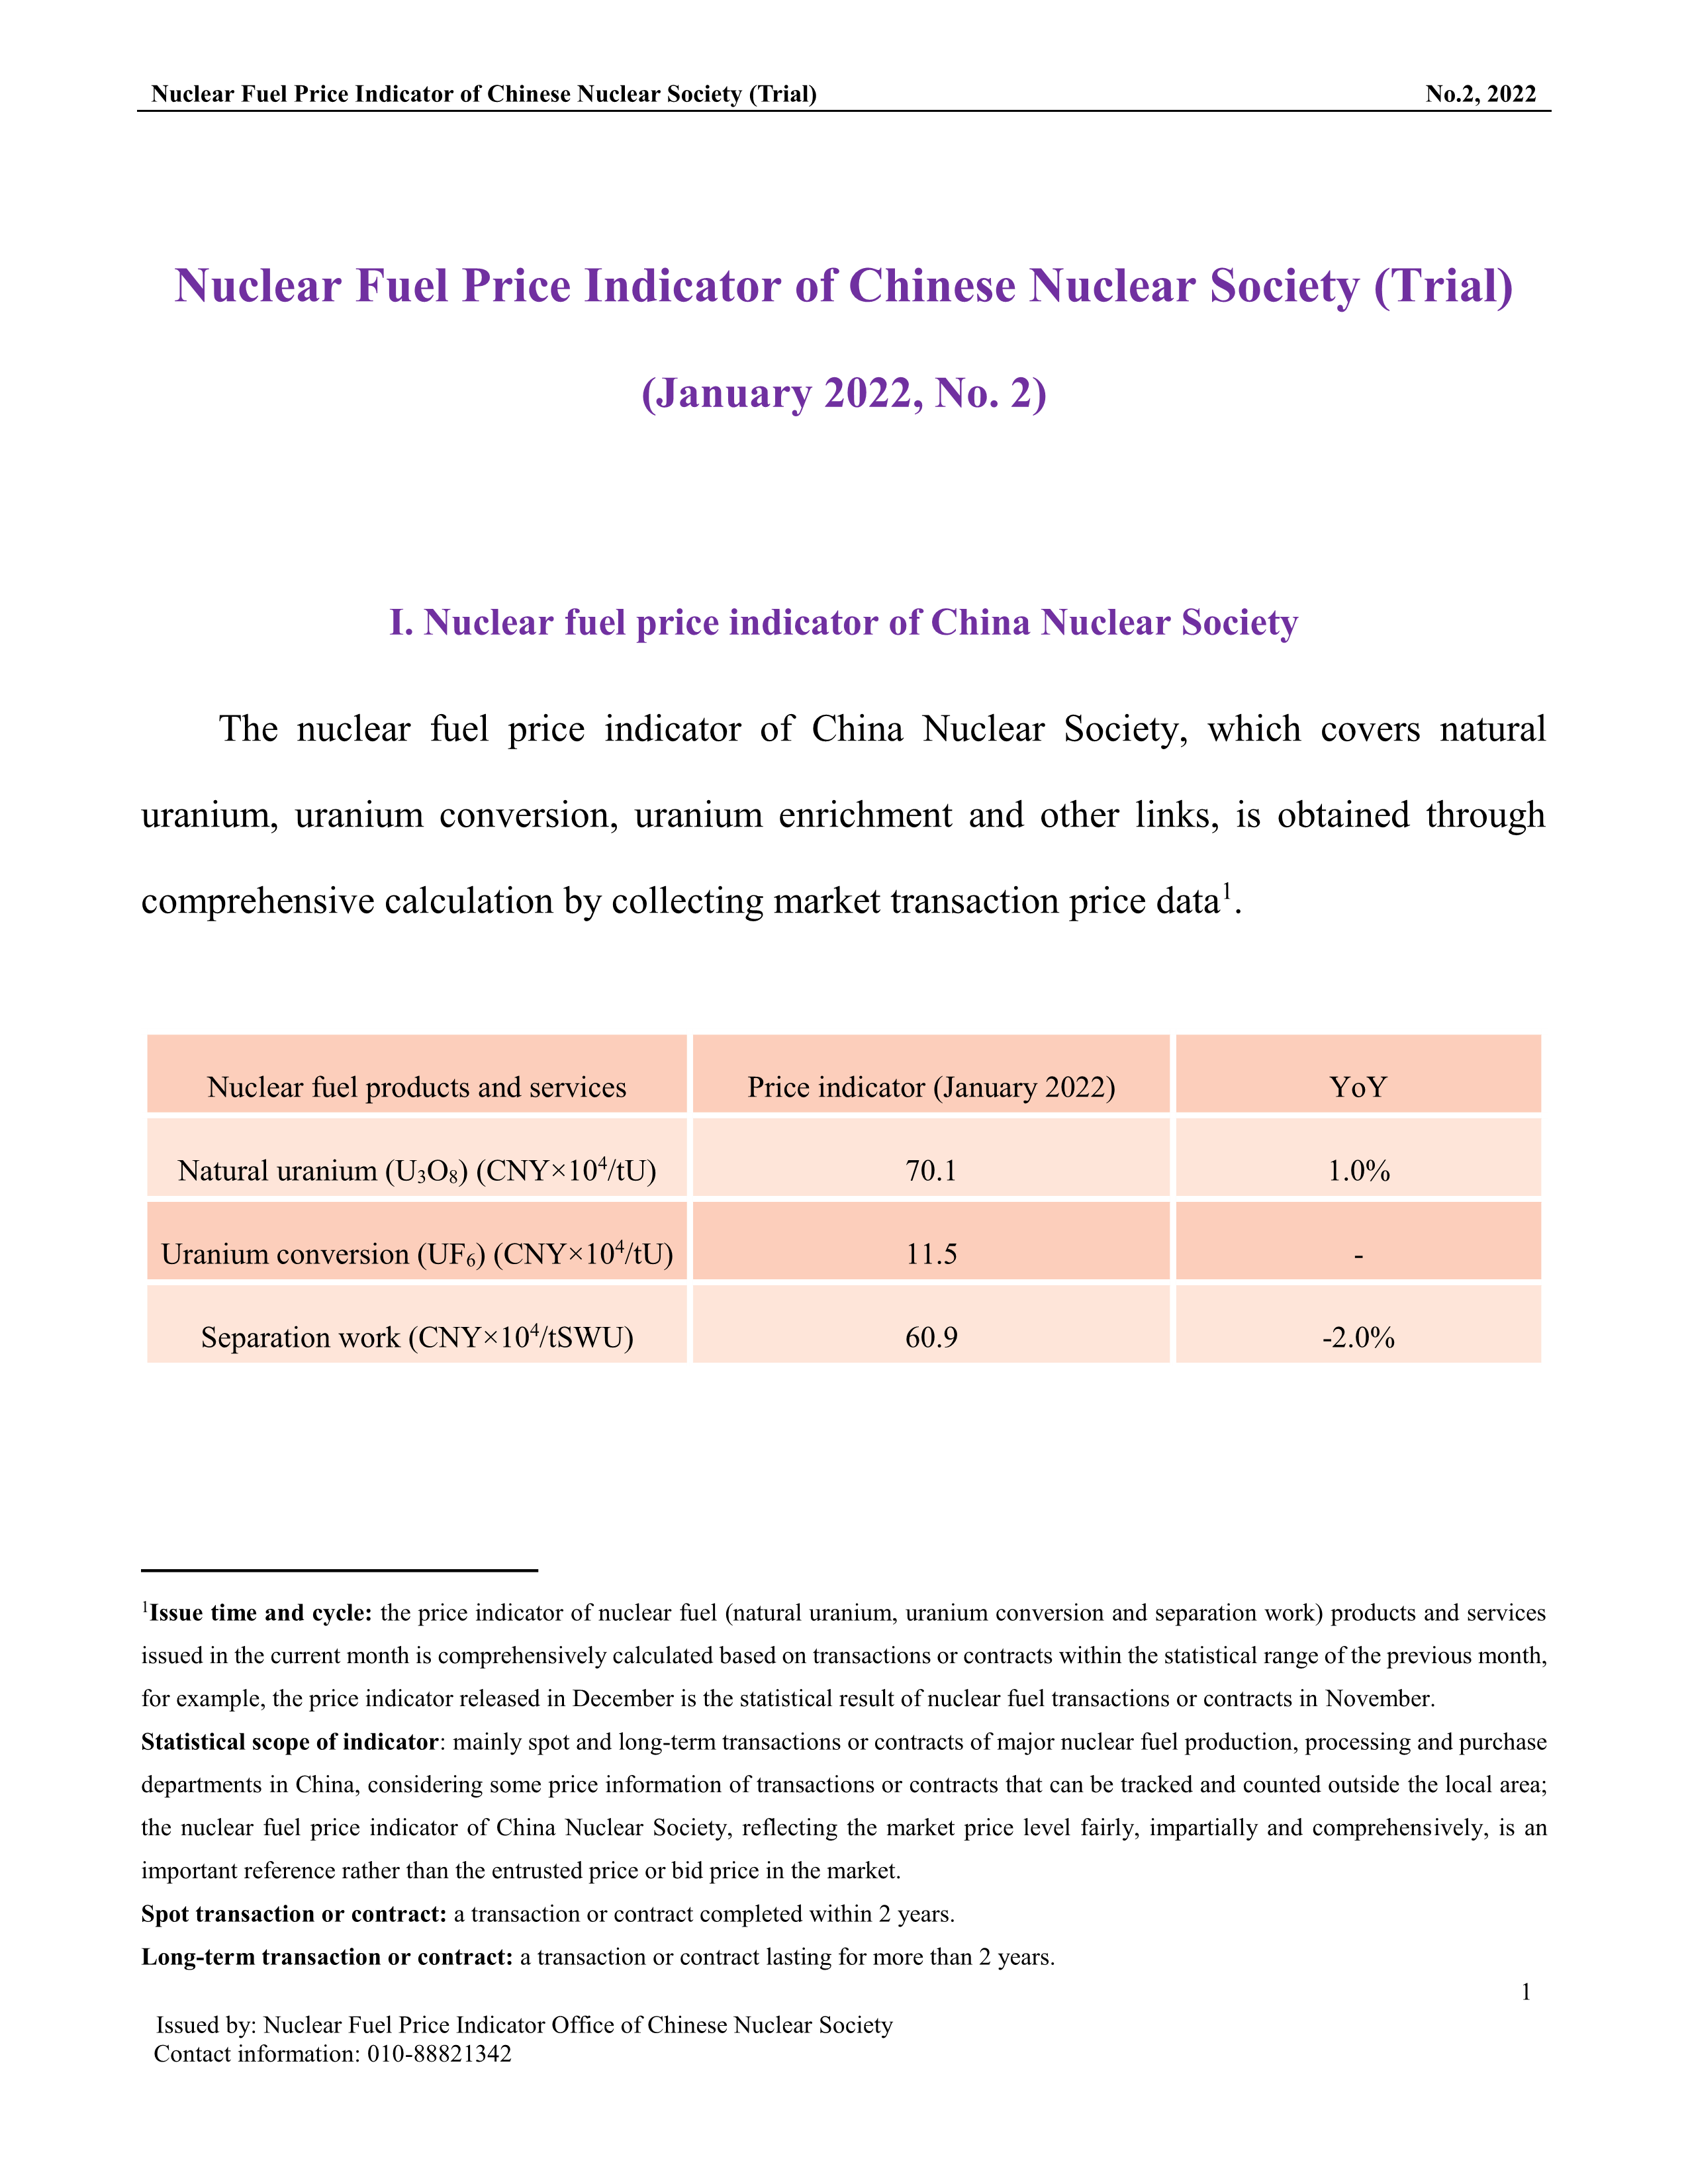 Nuclear Fuel Price Indicator of Chinese Nuclear Society (Trial)(January 2022, No. 2)-1.png